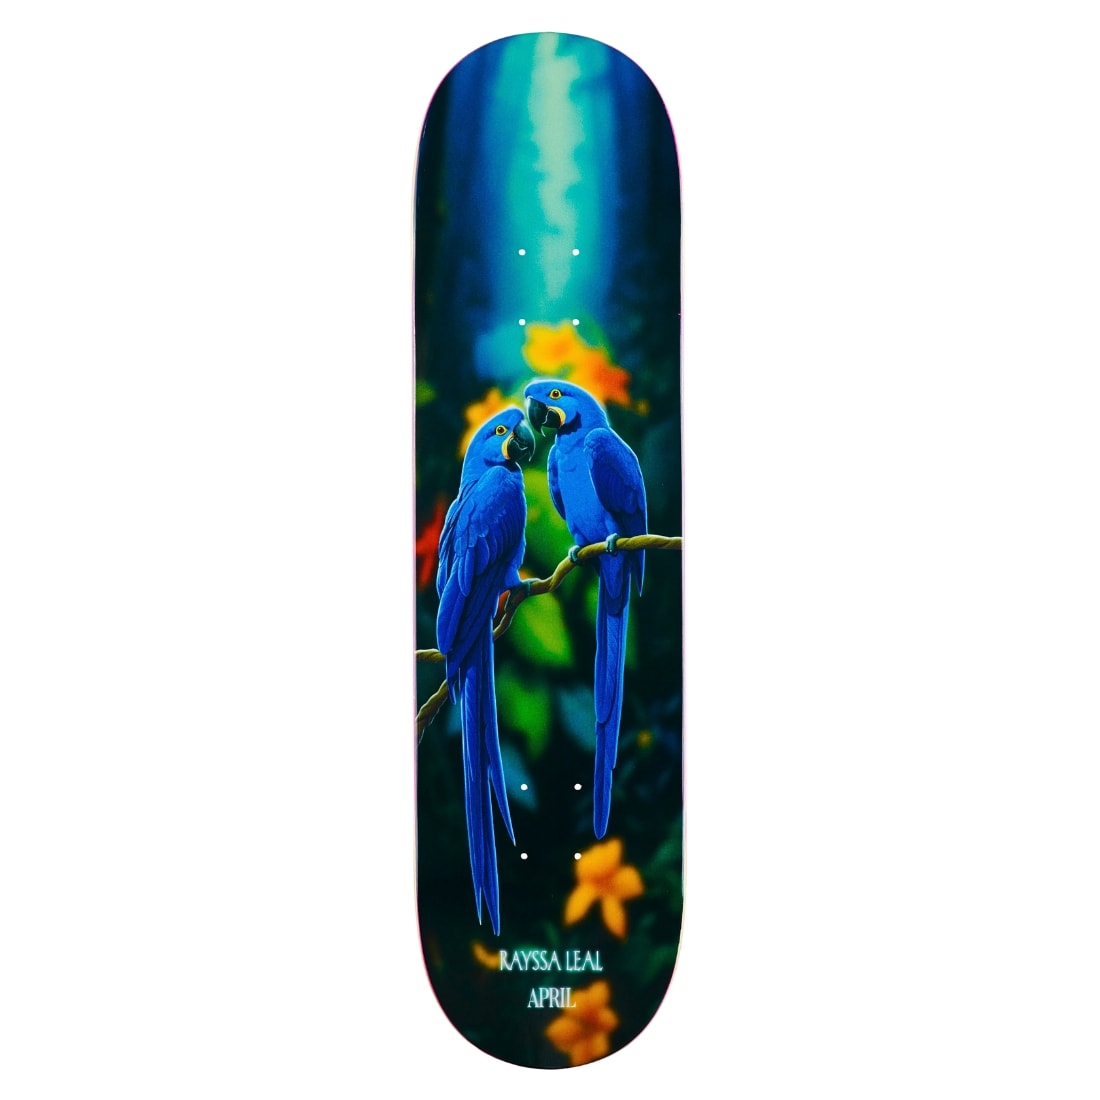 April 8.25&quot; Rayssa Leal Blue Macaw Skate Deck - Blue - Skateboard Deck by April 8.25 inch